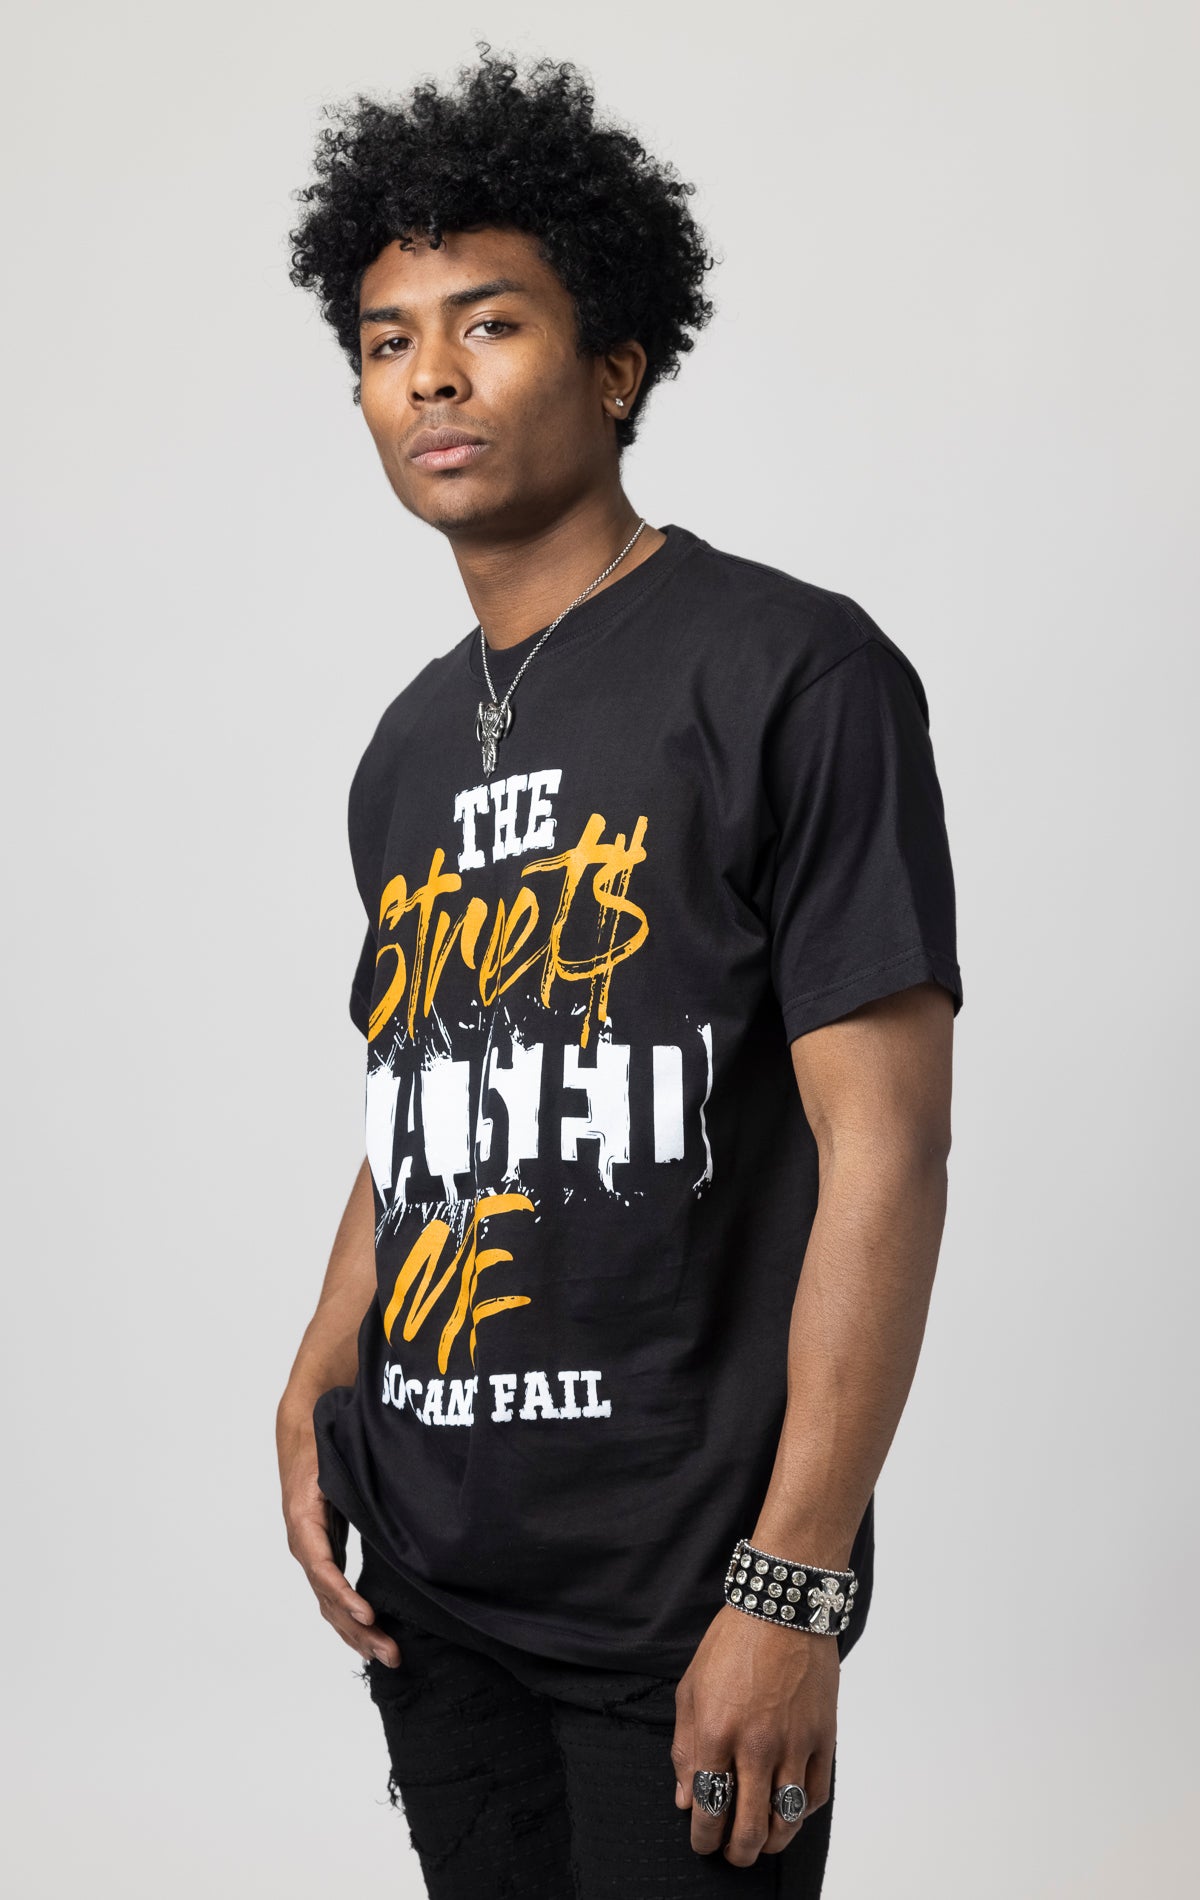 Oversized T-shirt with ribbed crew neck and a "The Streets Raised Me" printed design on the front.